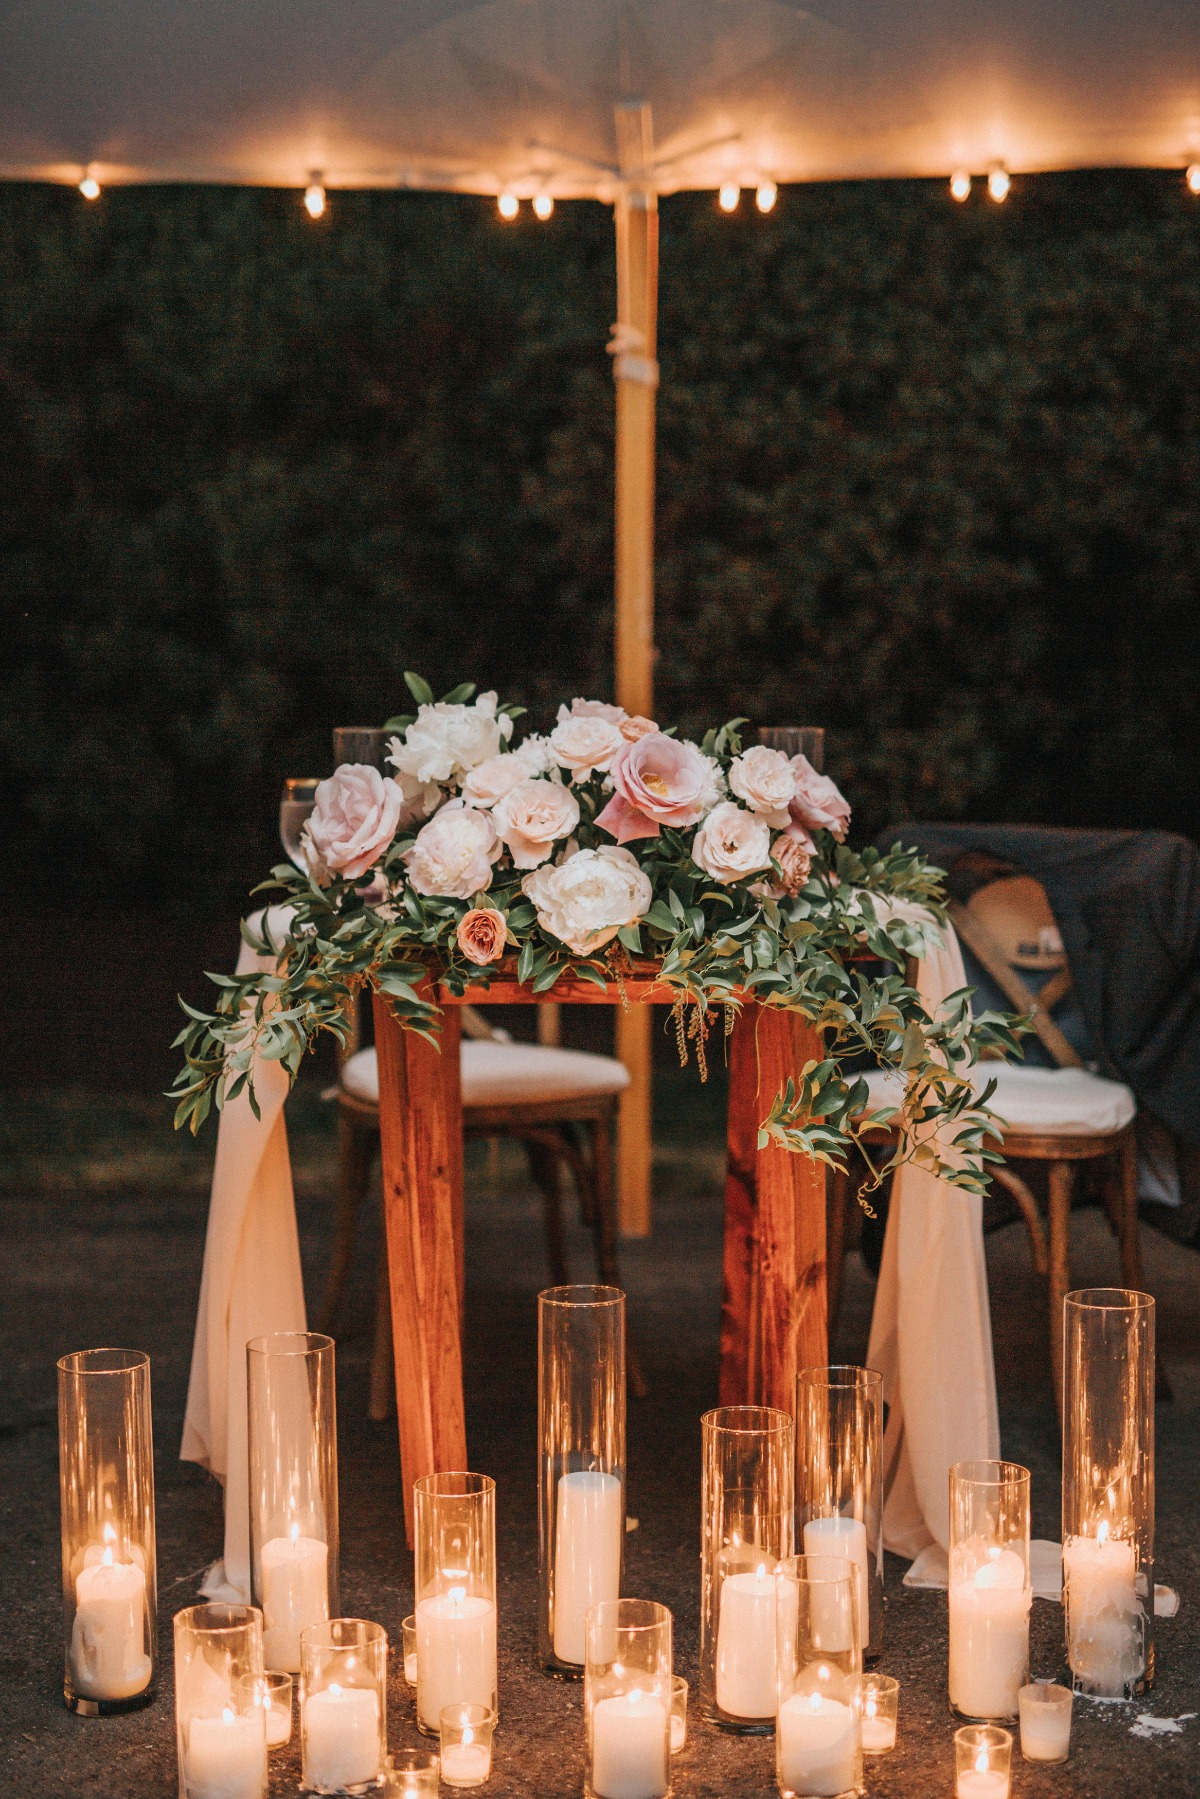 Sweetheart table and candles